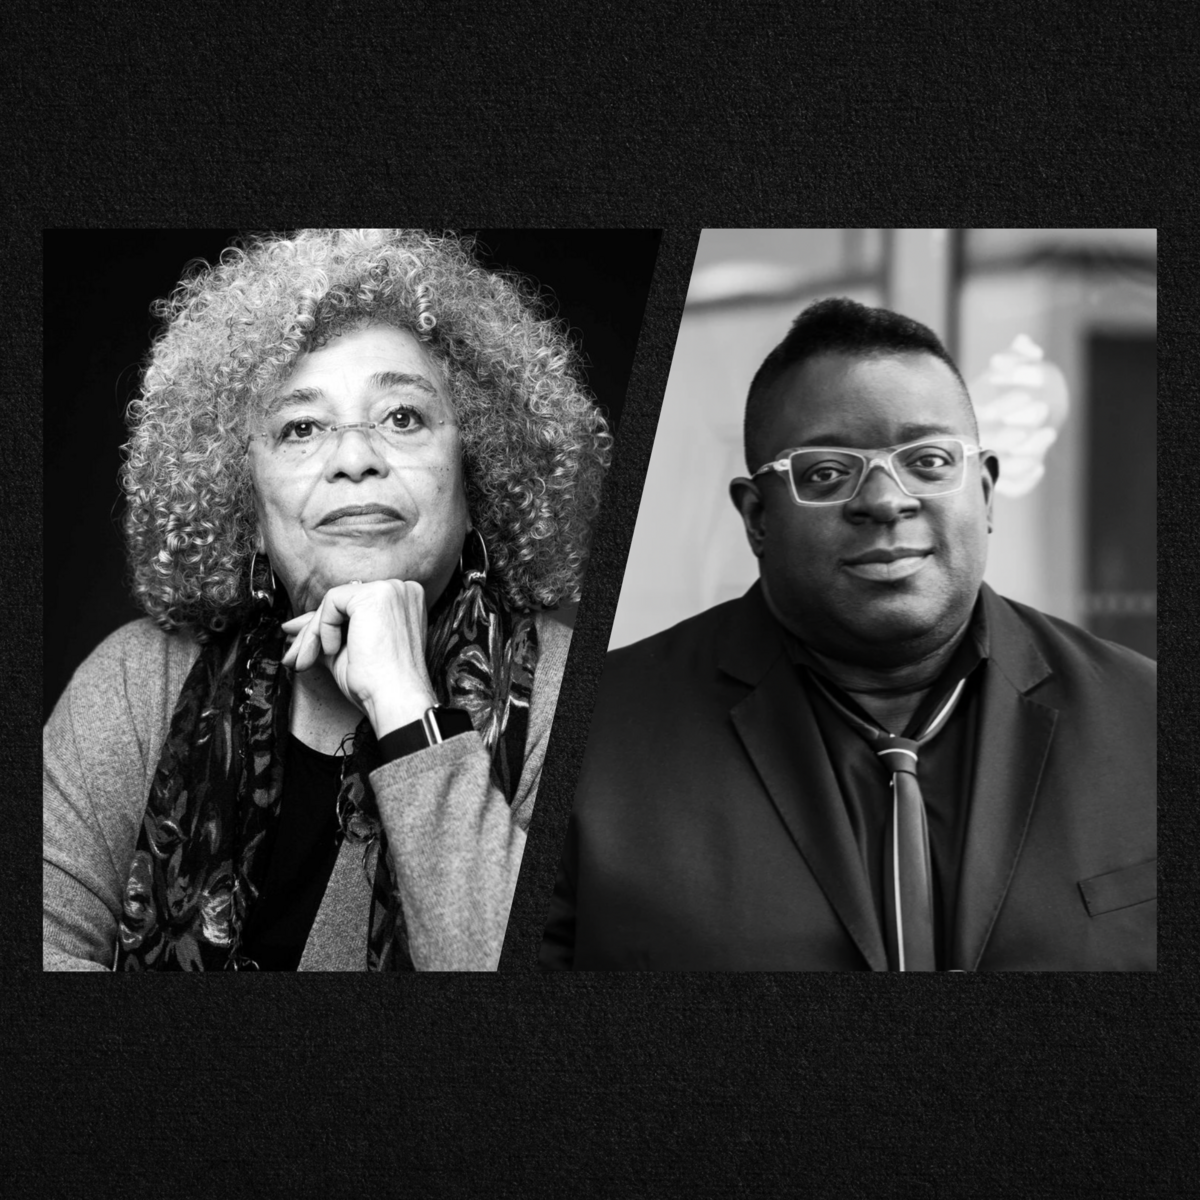 Two headshots of lecture speakers. Left: Angela Davis, a black woman. She looks pensively into the camera. Right: Isaac Julien, a black man. He is smiling into the camera. Each photo is in black & white.